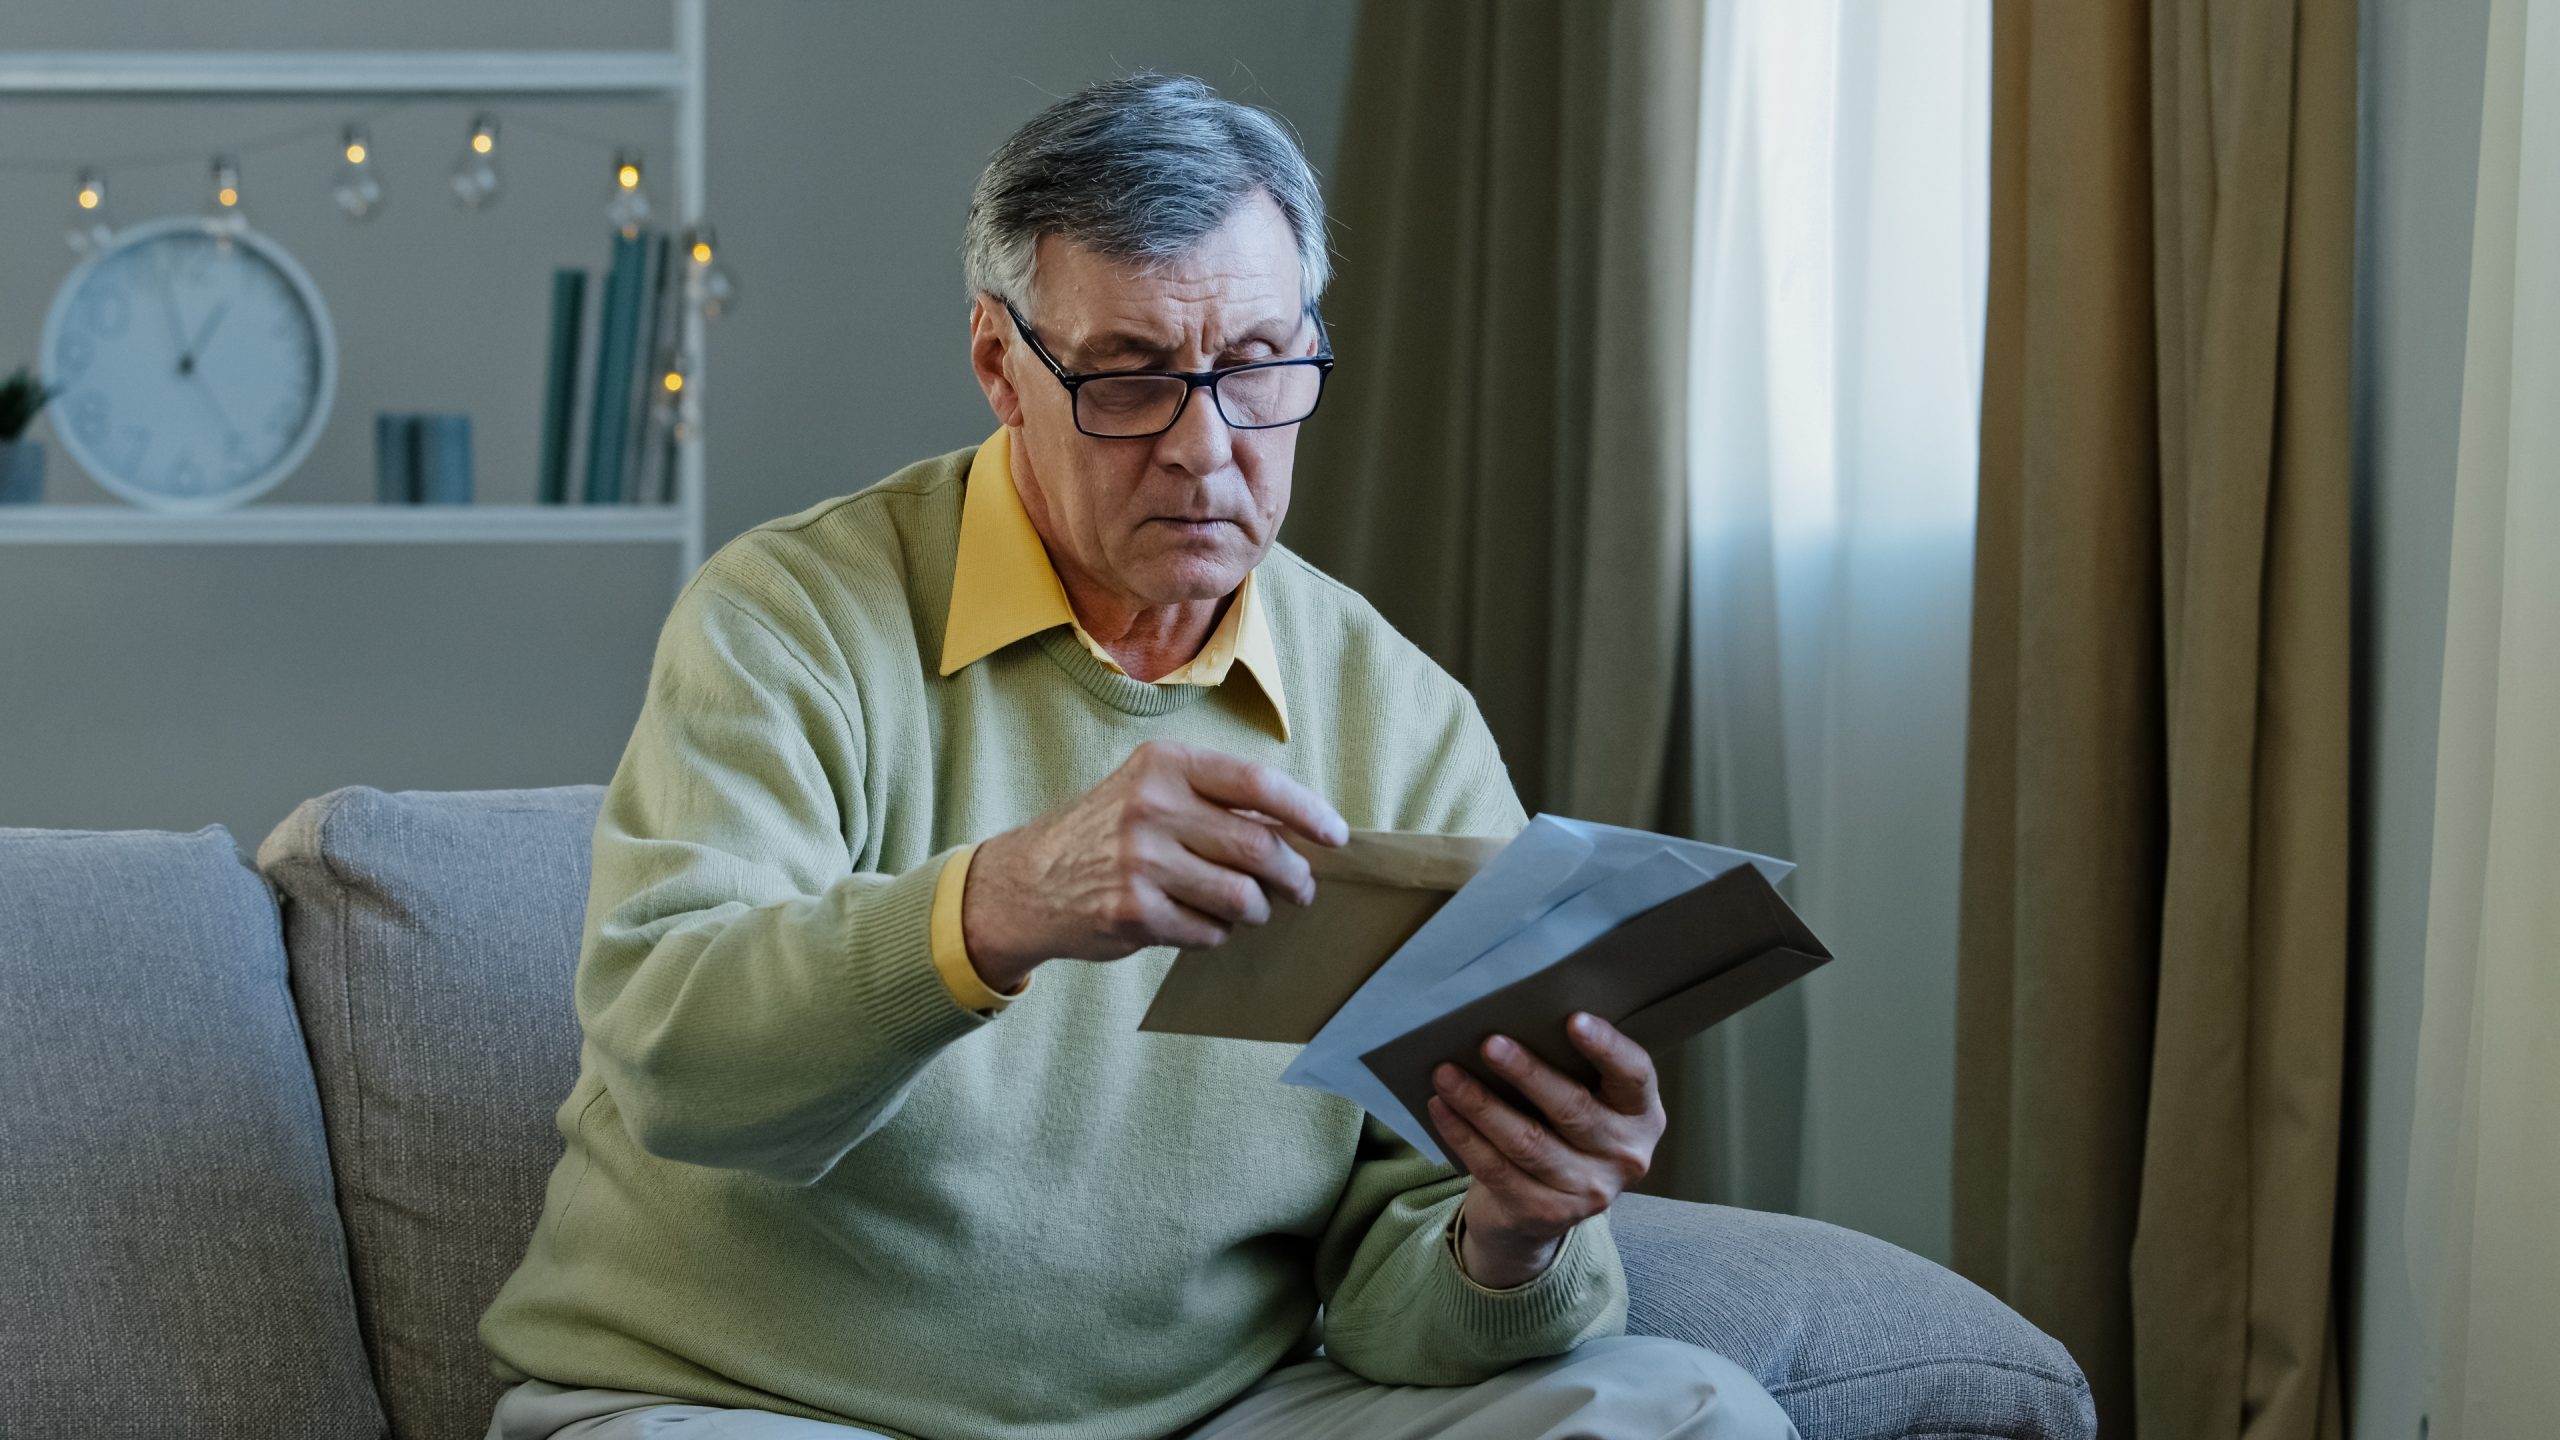 Older man with glasses sorting letters in living room.